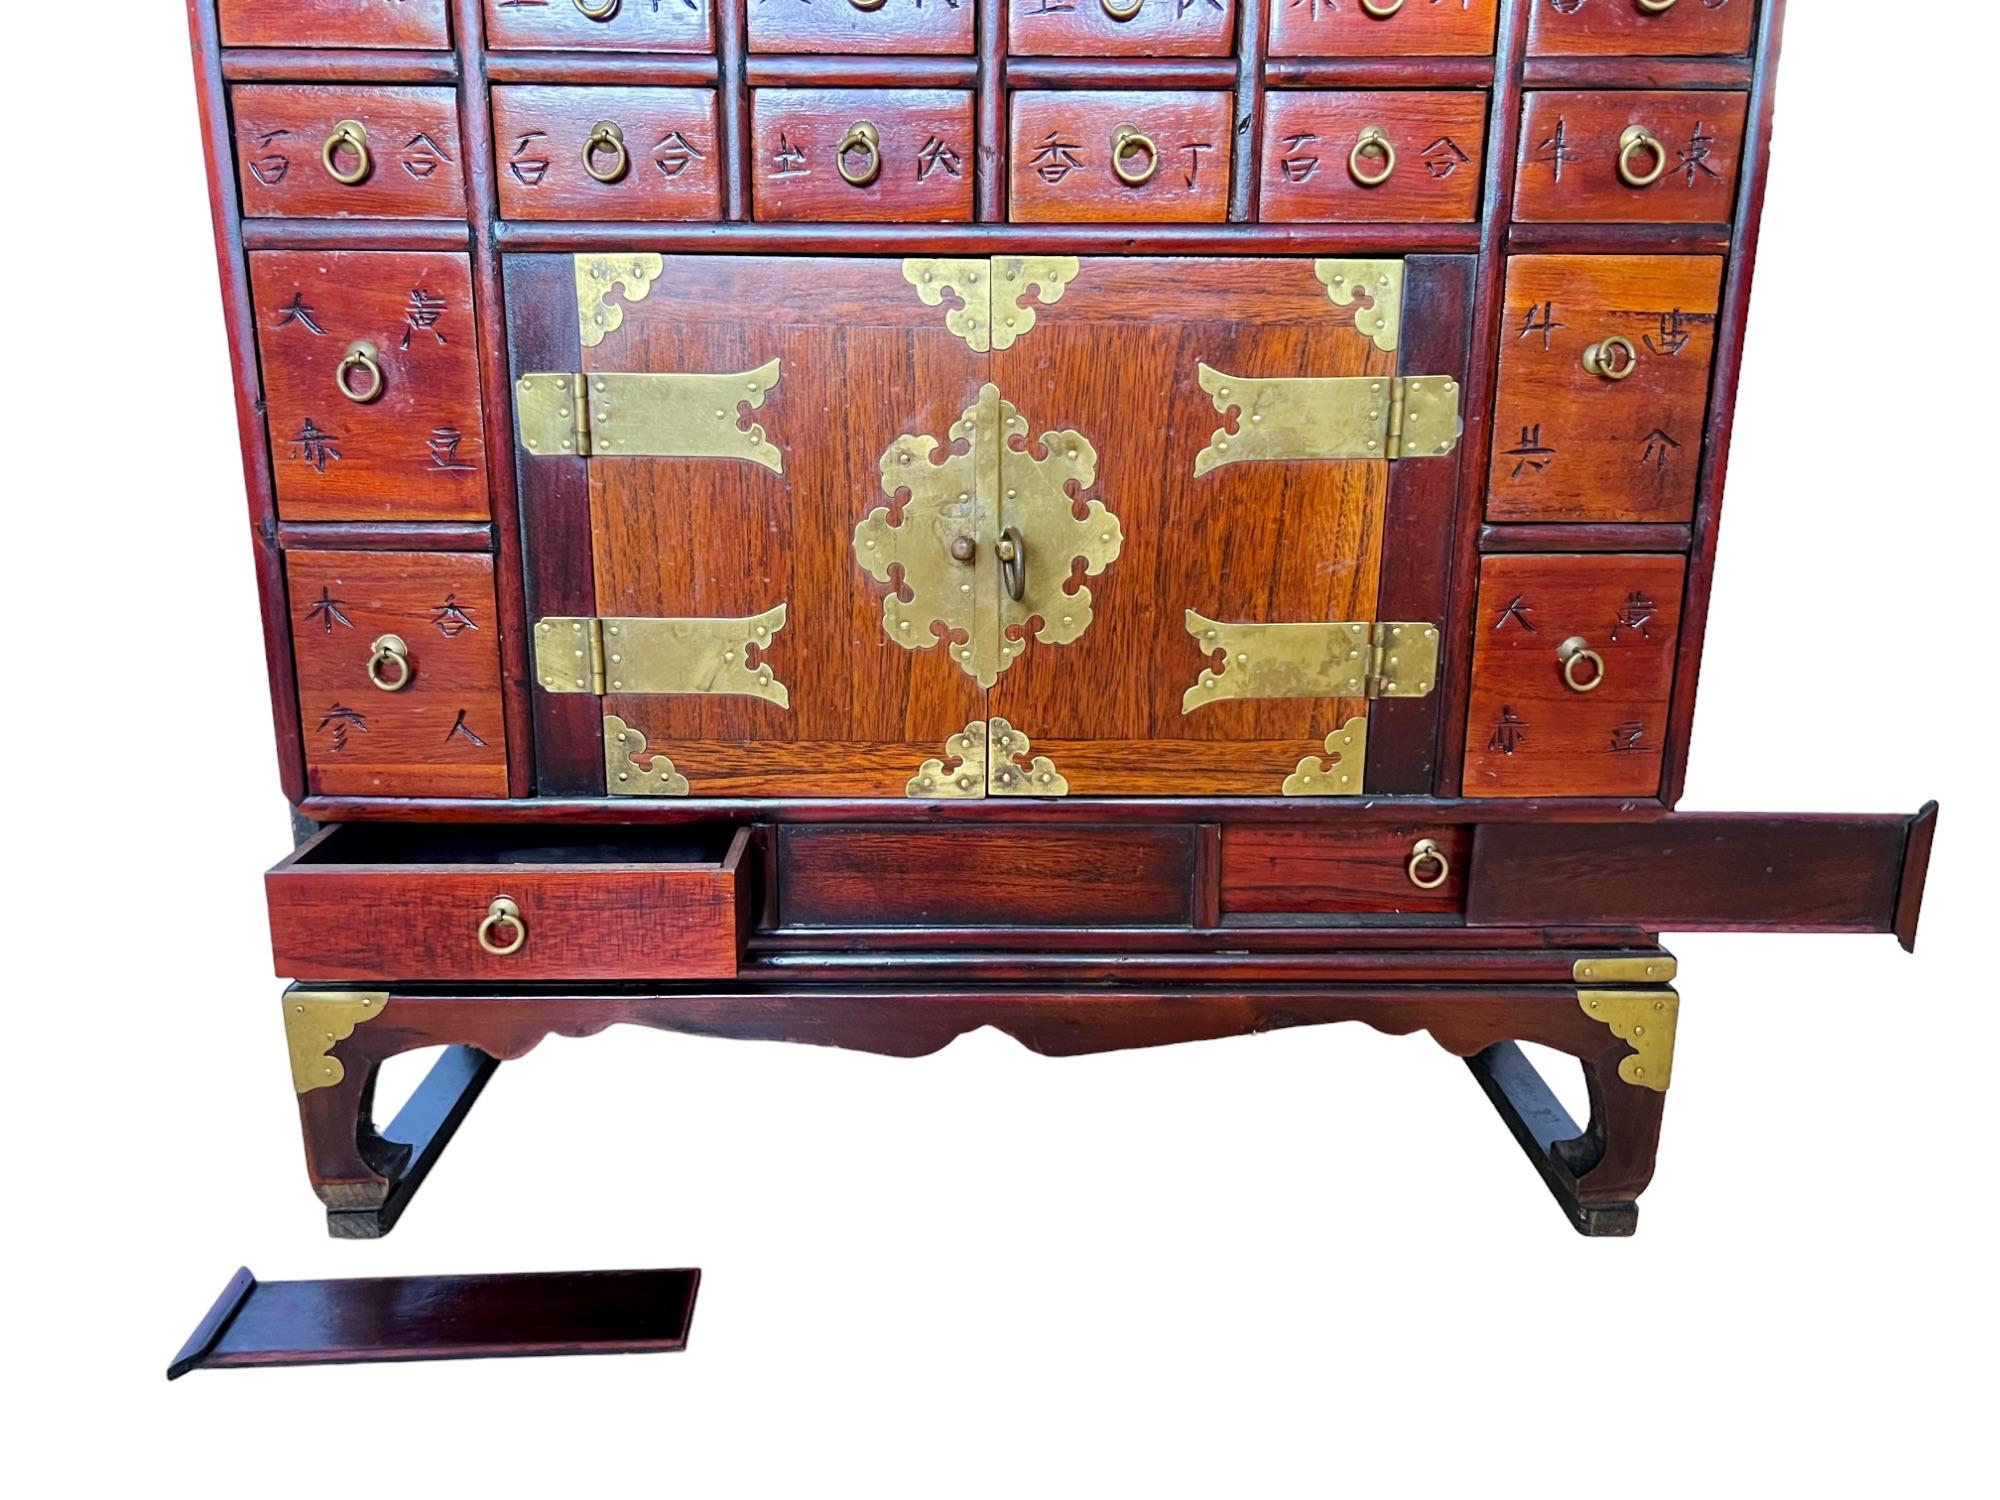 Chinese Lingerie Chest and Korean Apothecary Cabinet, a Set 11